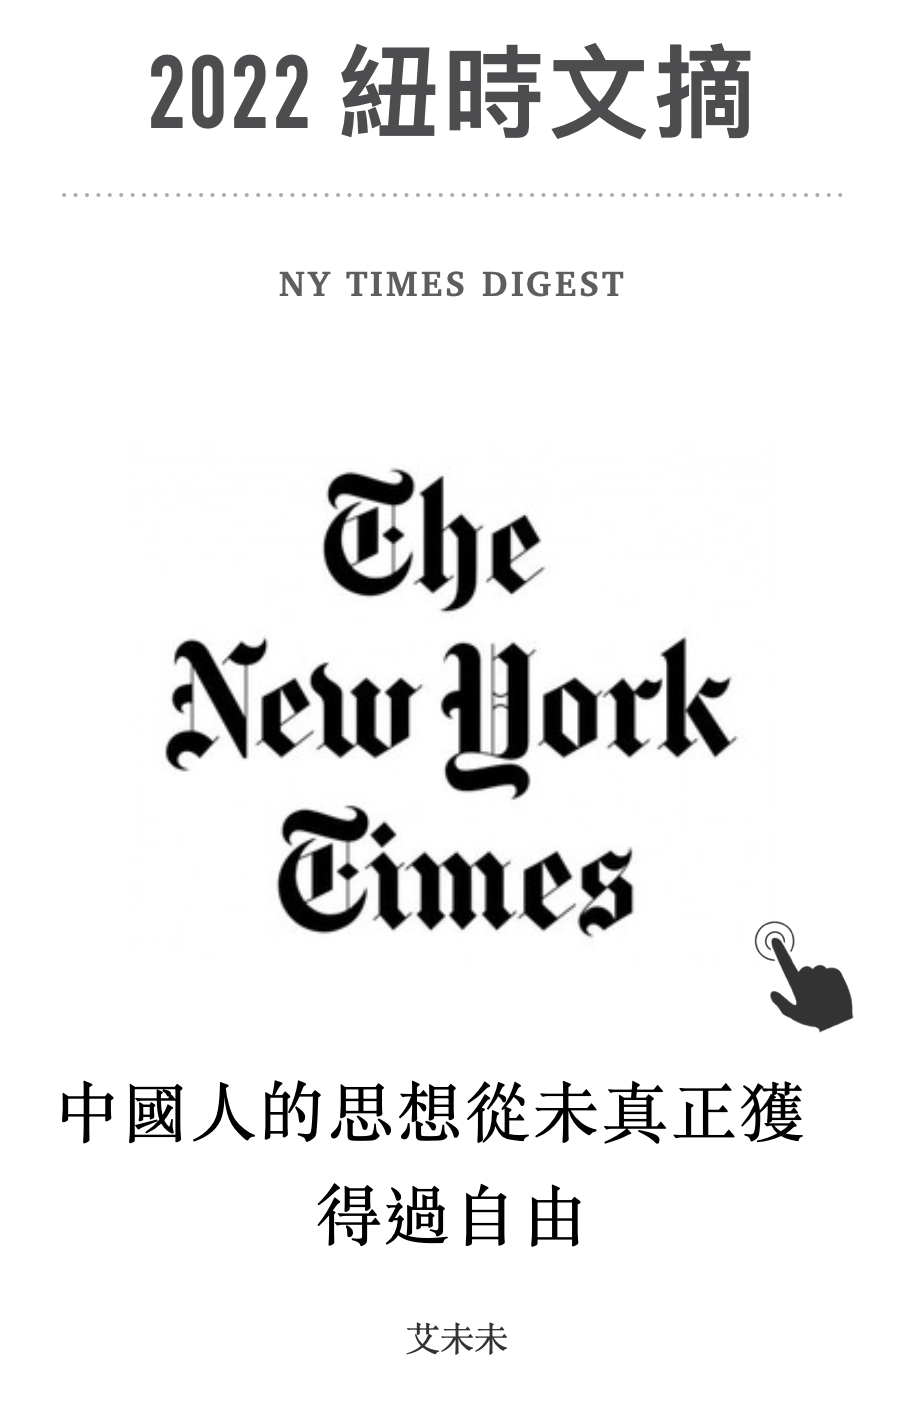 NY Times Digest